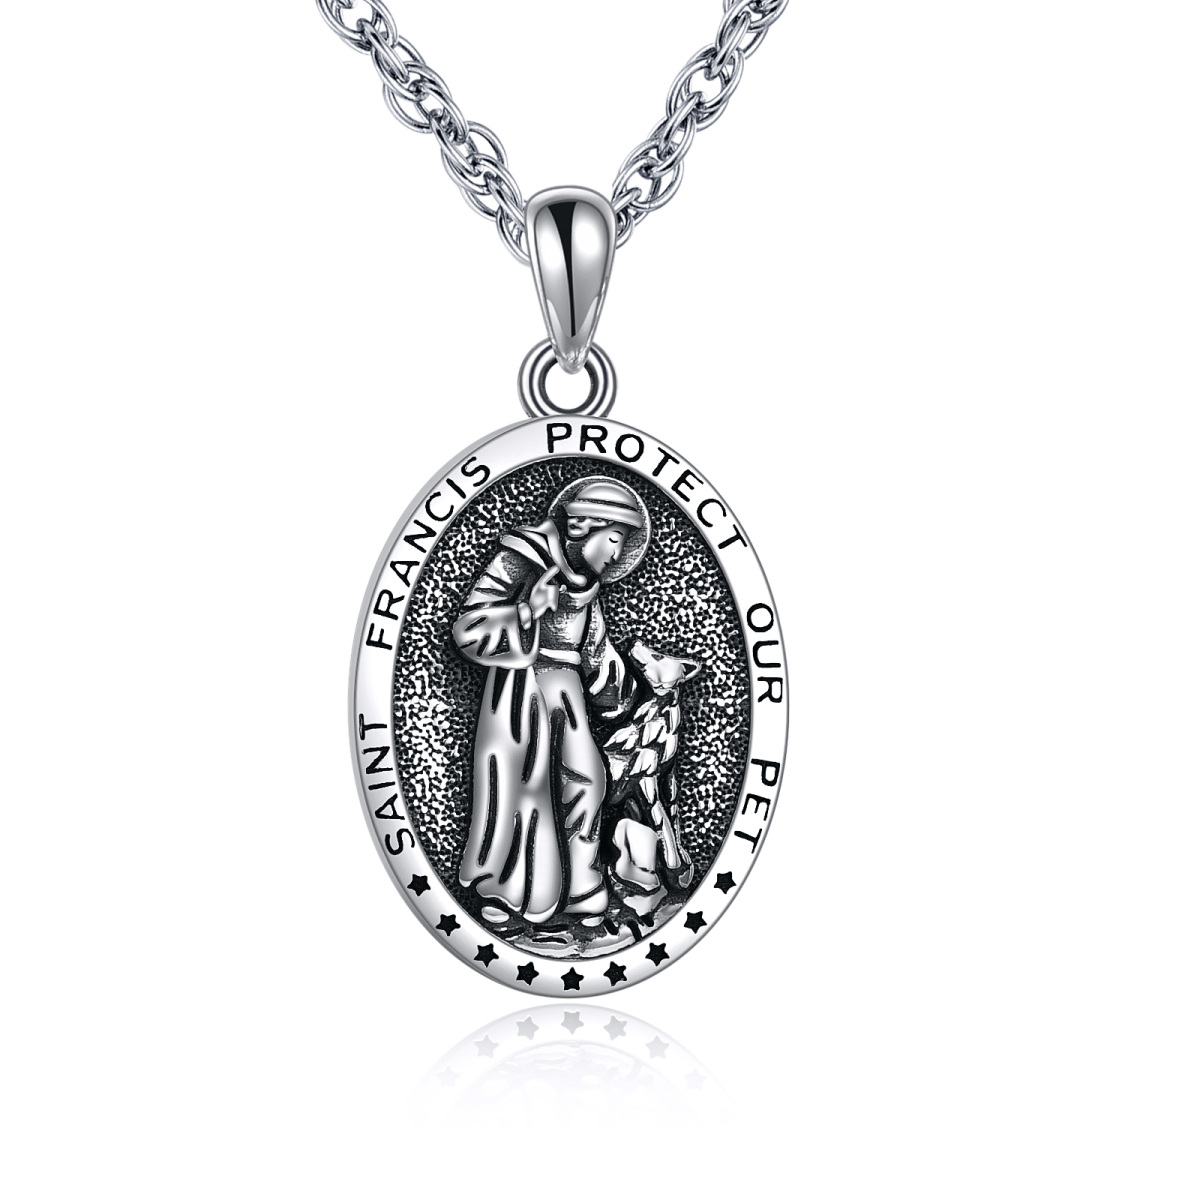 Sterling Silver Saint Francis Pendant Necklace with Engraved Word-1